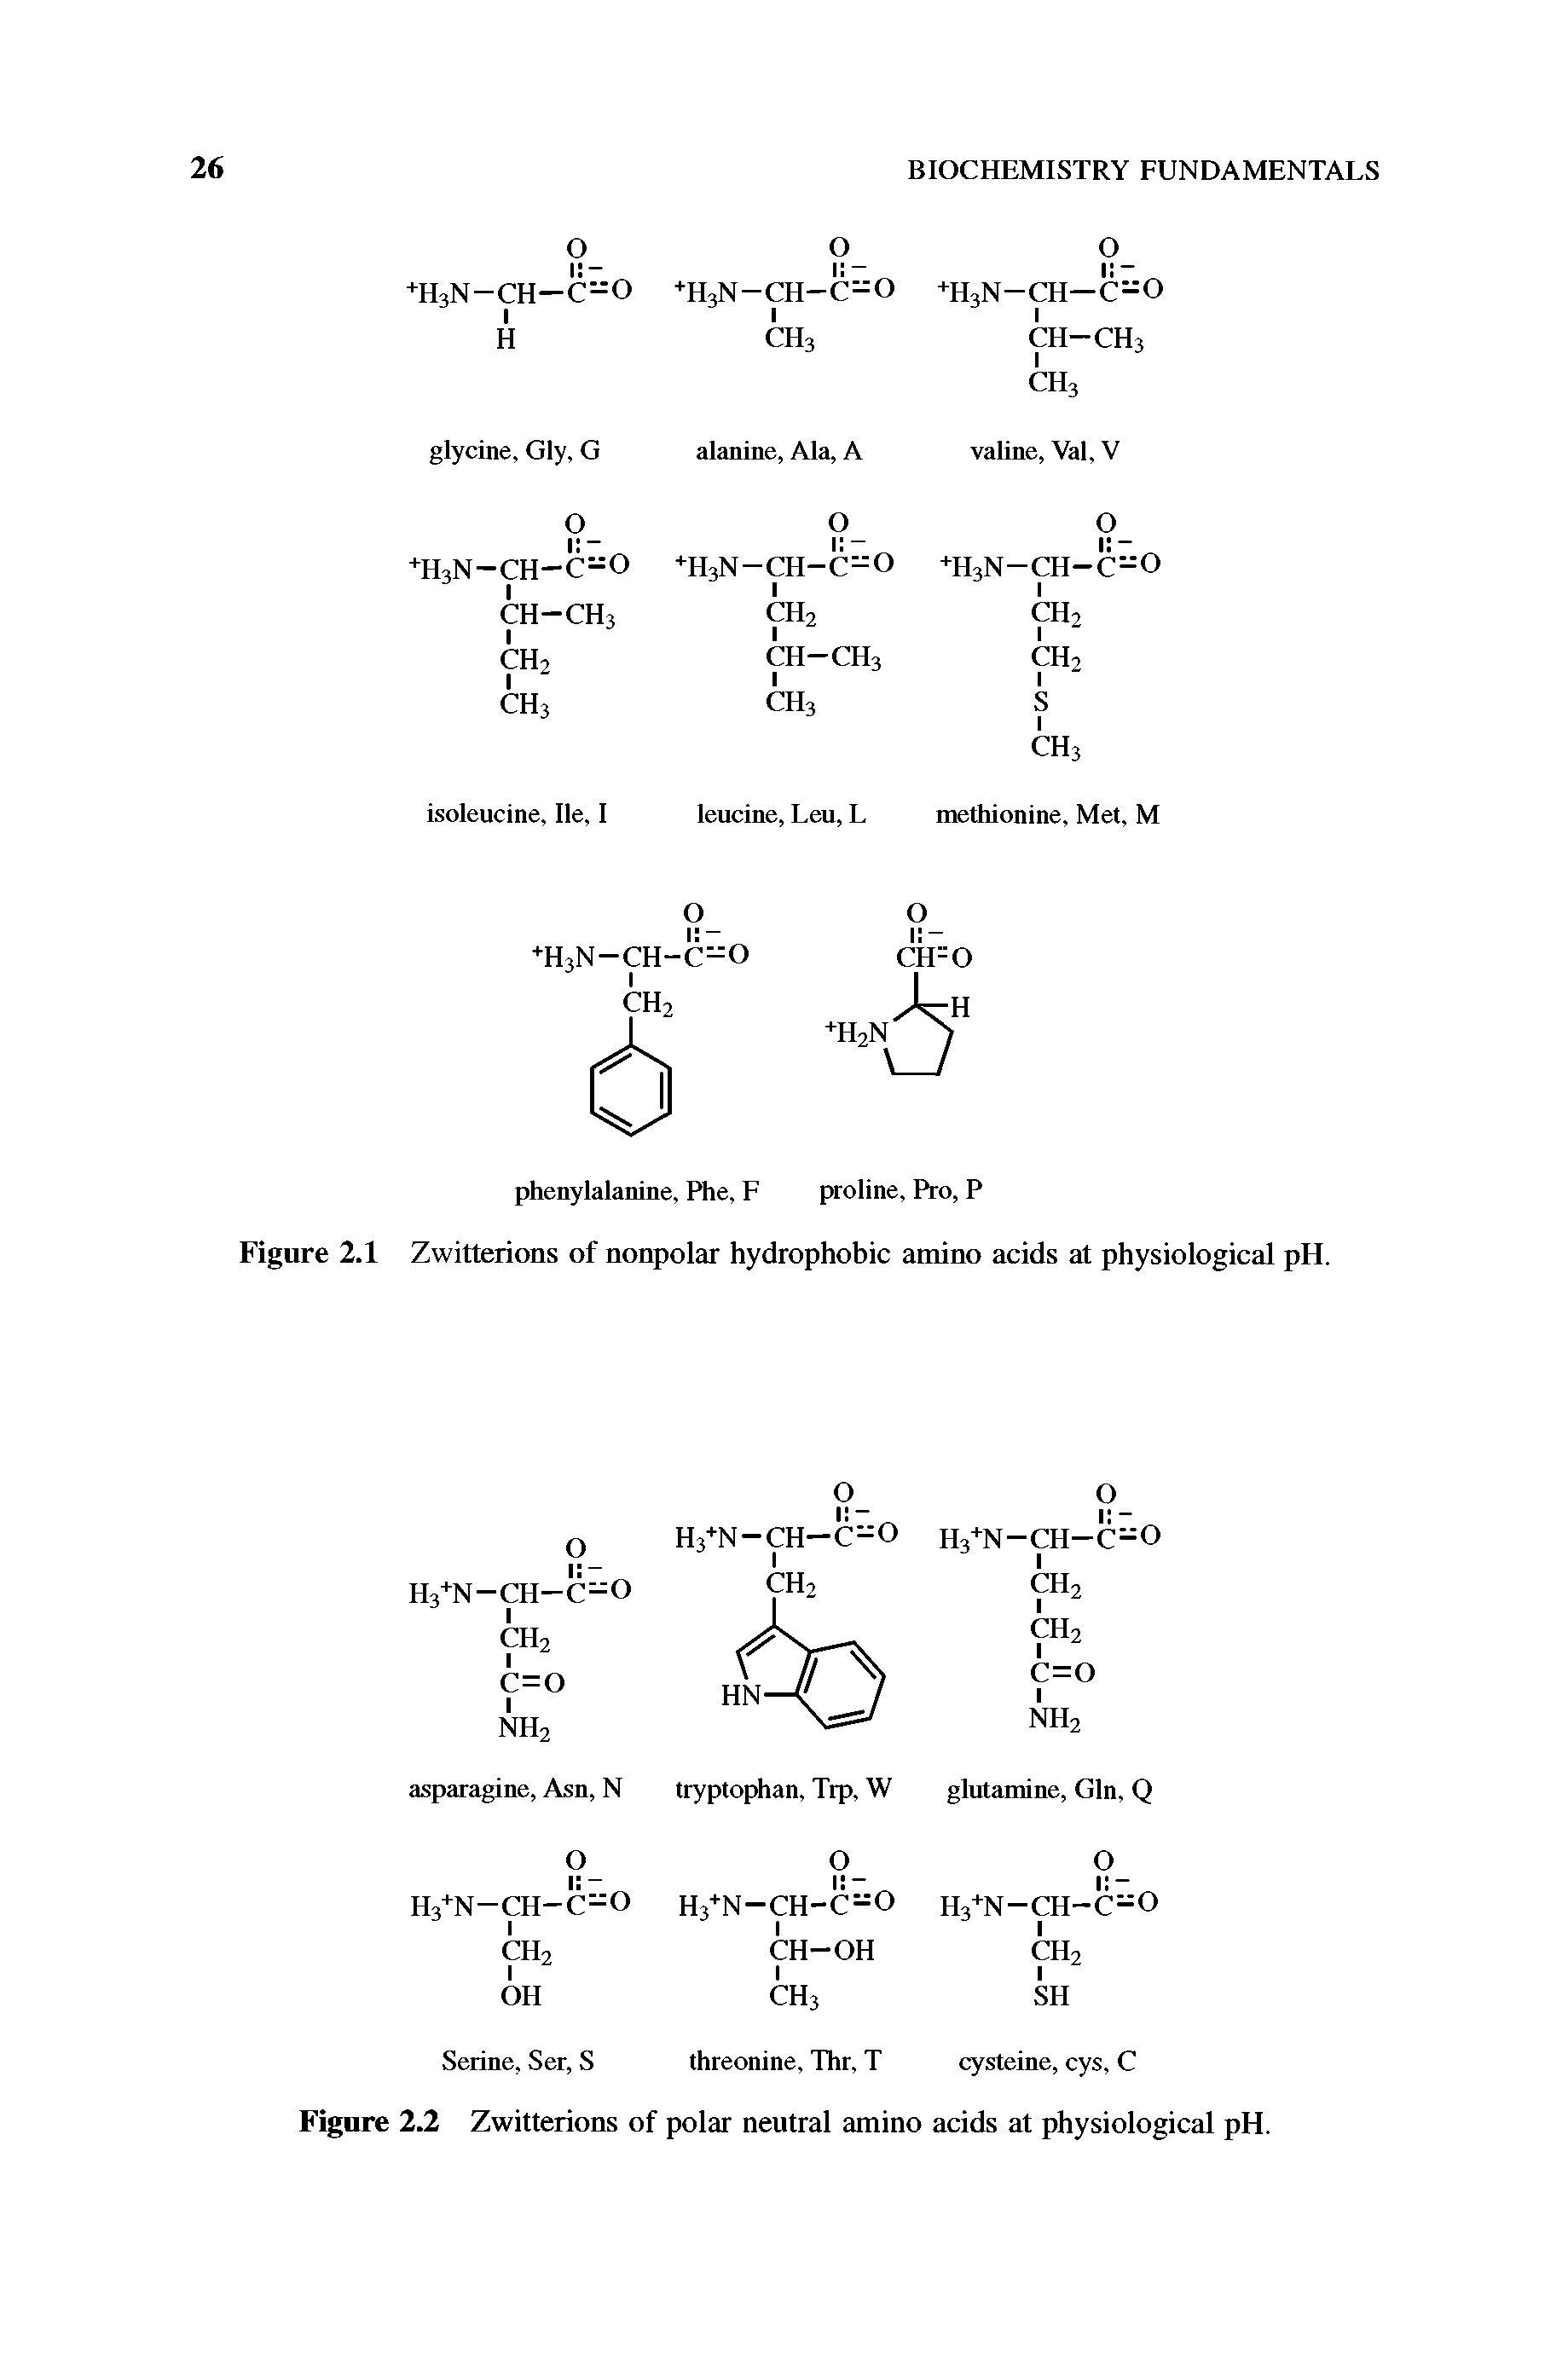 Figure 2.2 Zwitterions of polar neutral amino acids at physiological pH.